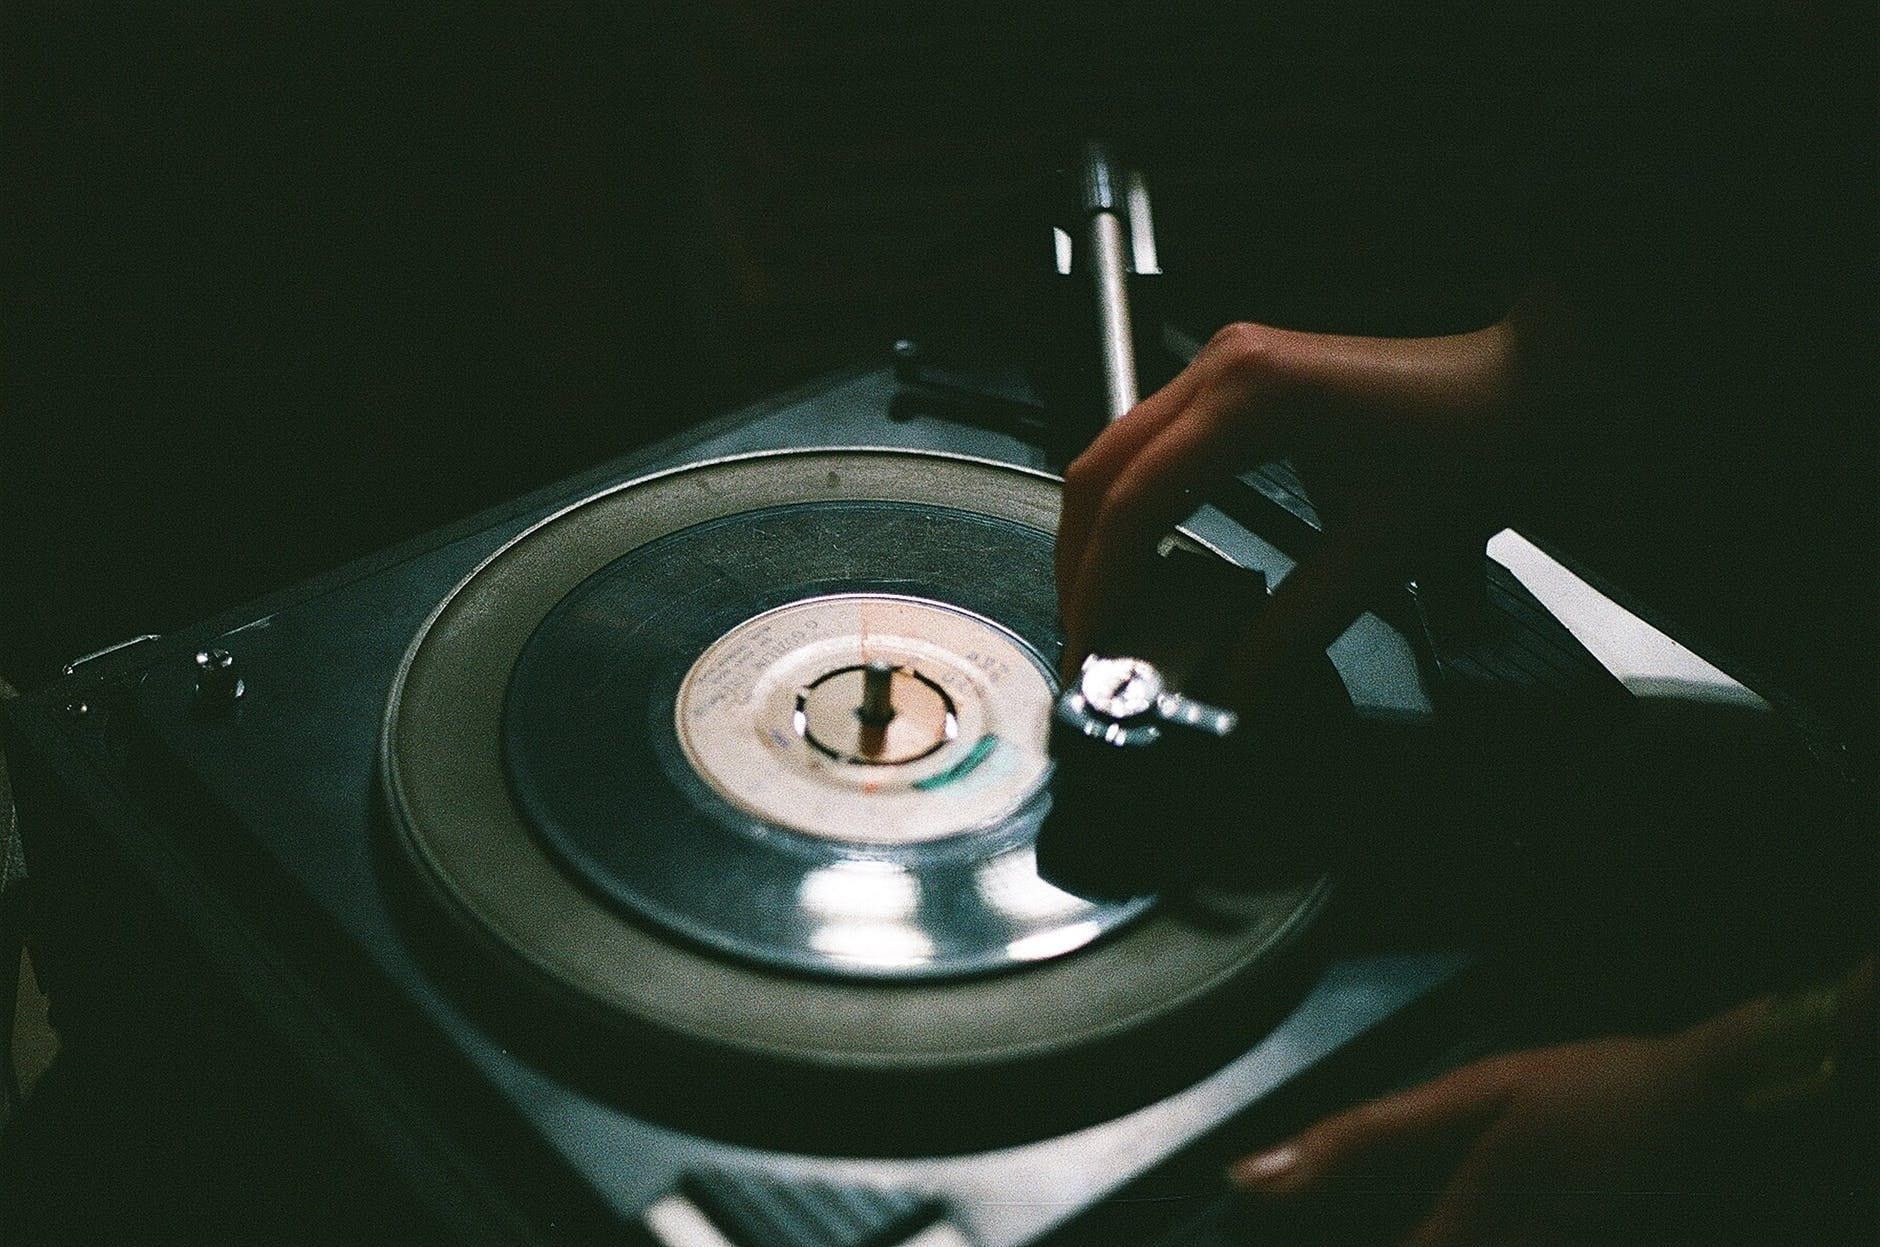 A hand lowers the record player stylus to start playing music